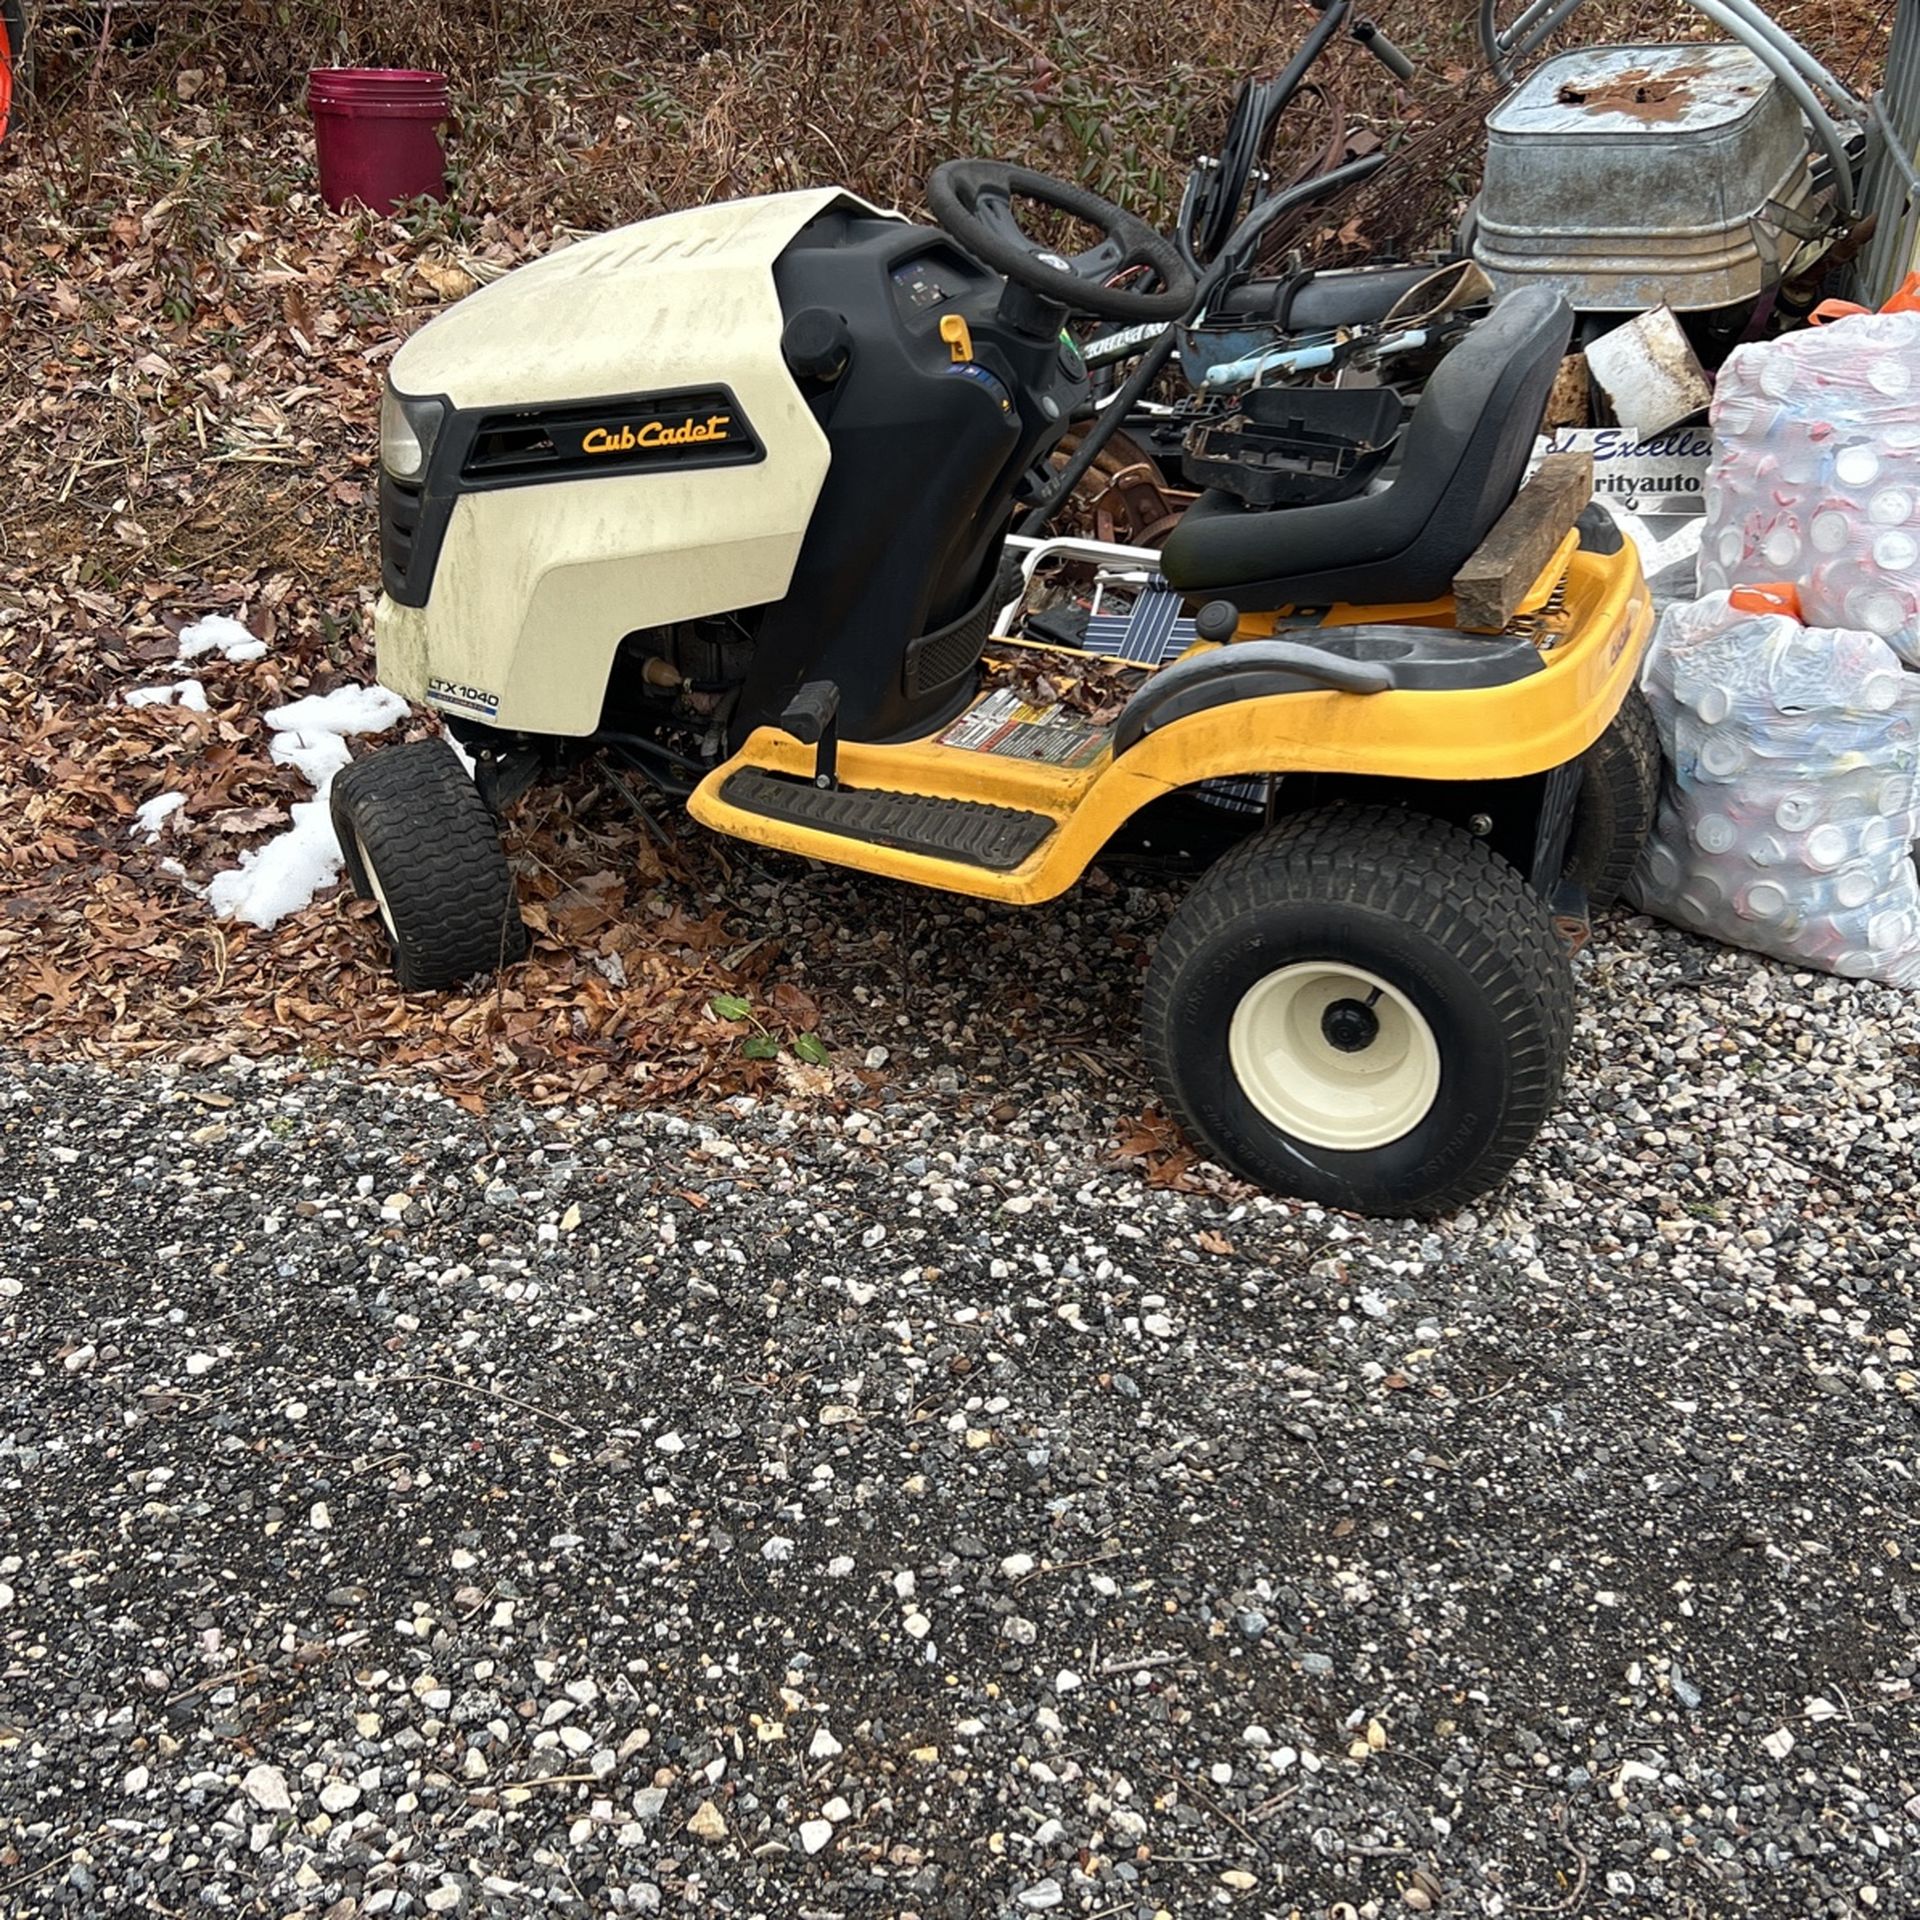 A cub cadet, yellow and black twin cam and has a mower with it